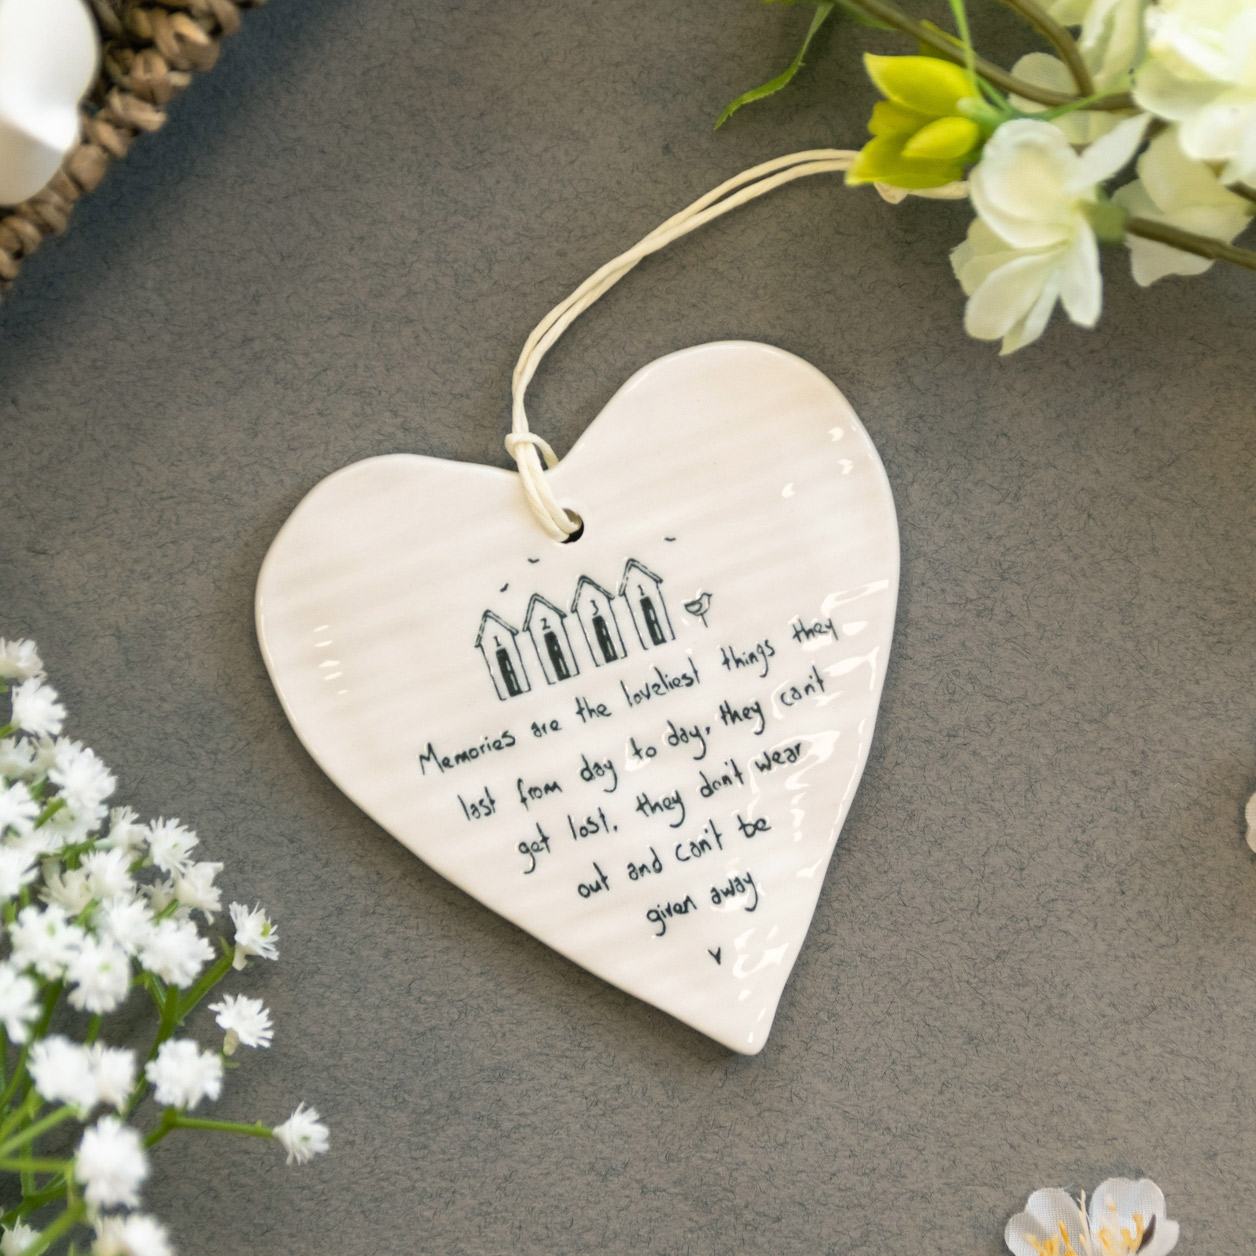 East of India Porcelain Wobbly Hanging Heart - Memories